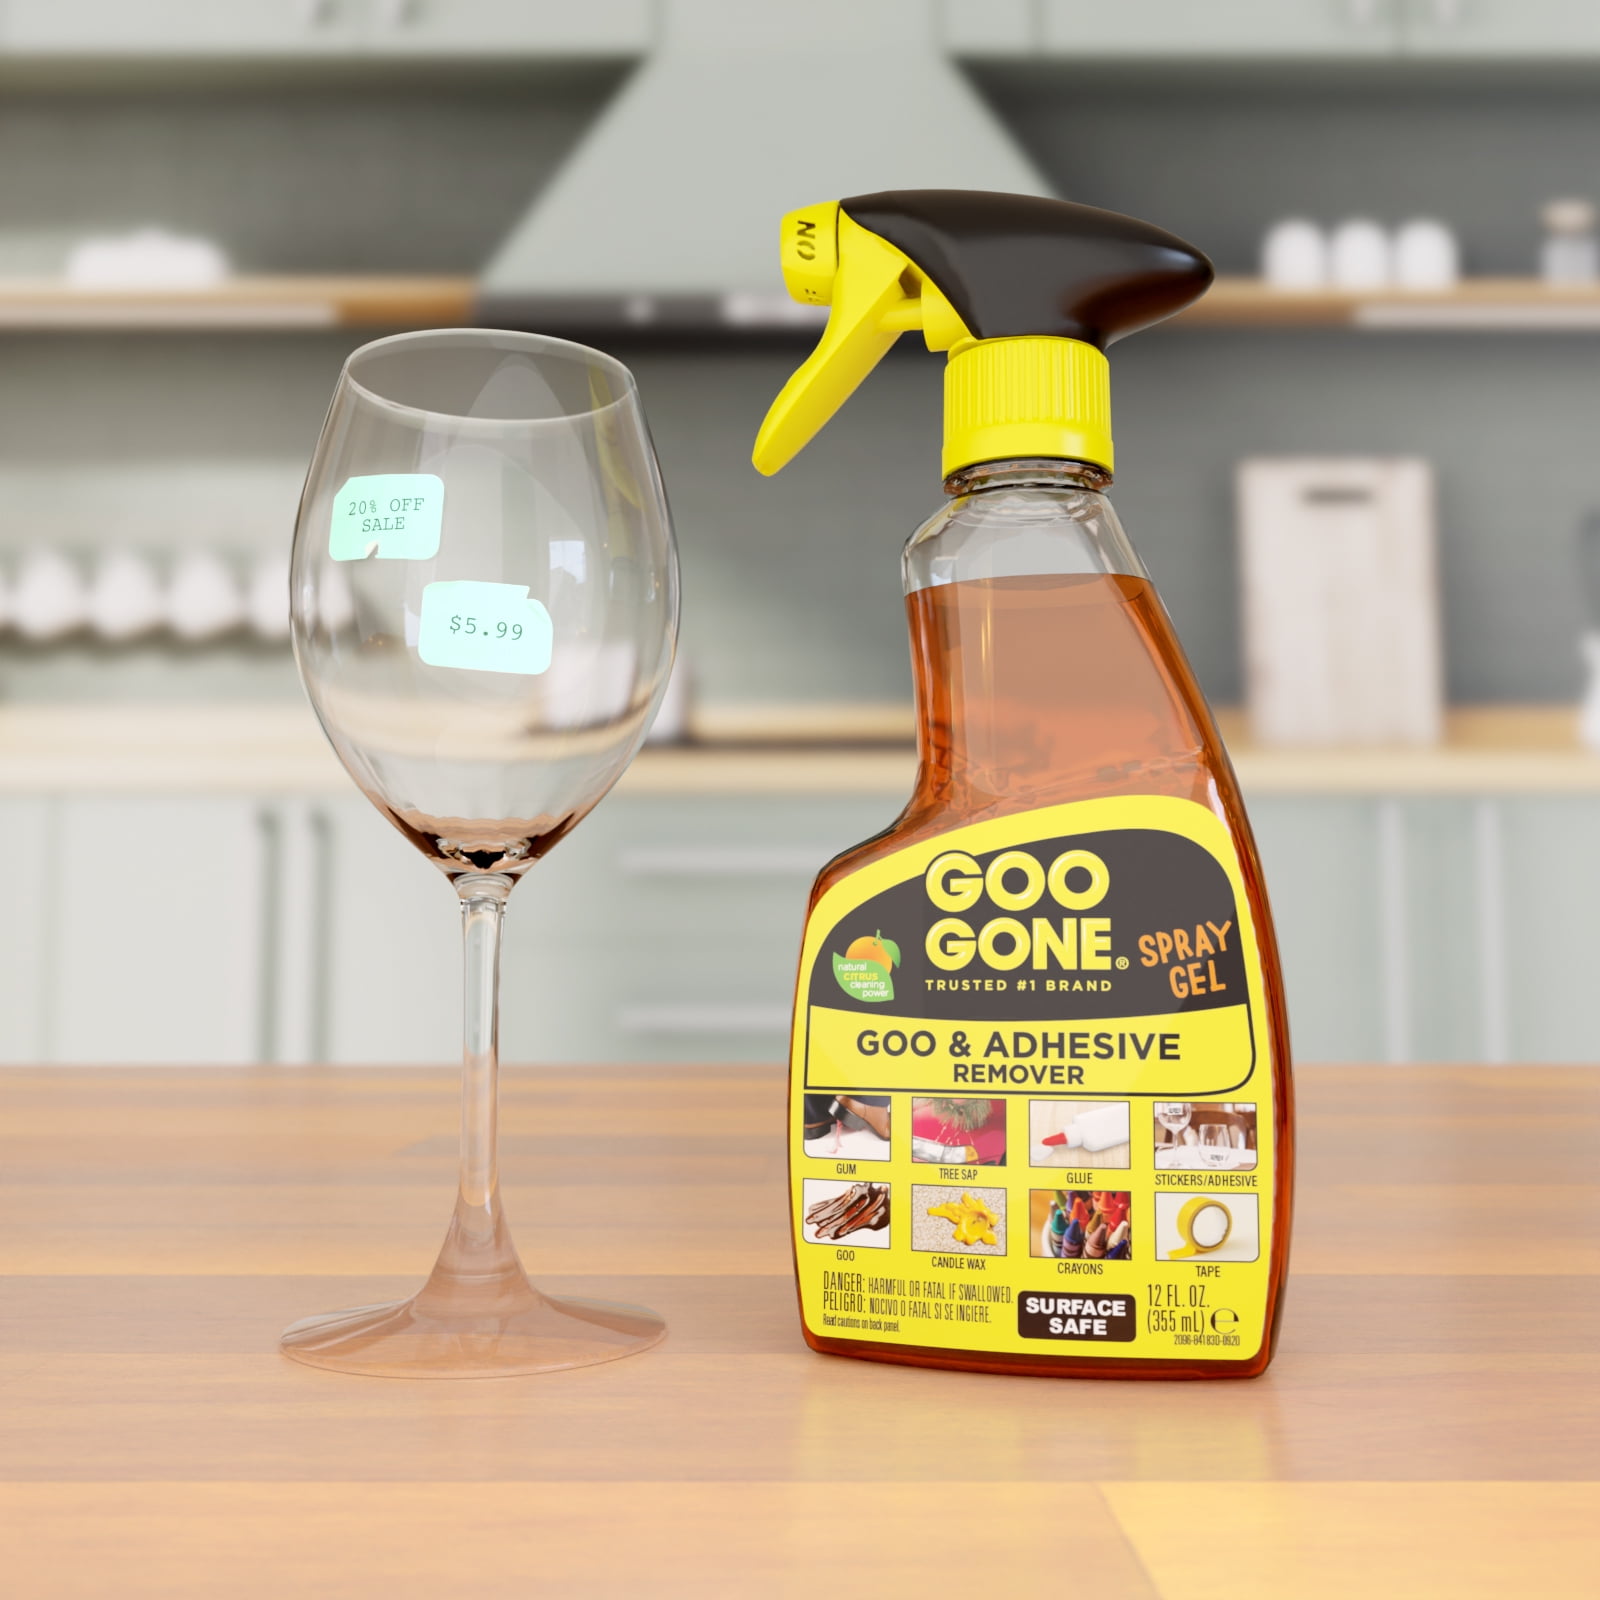 Goo Gone 12 oz. Goo and Adhesive Remover All-Purpose Cleaner Spray